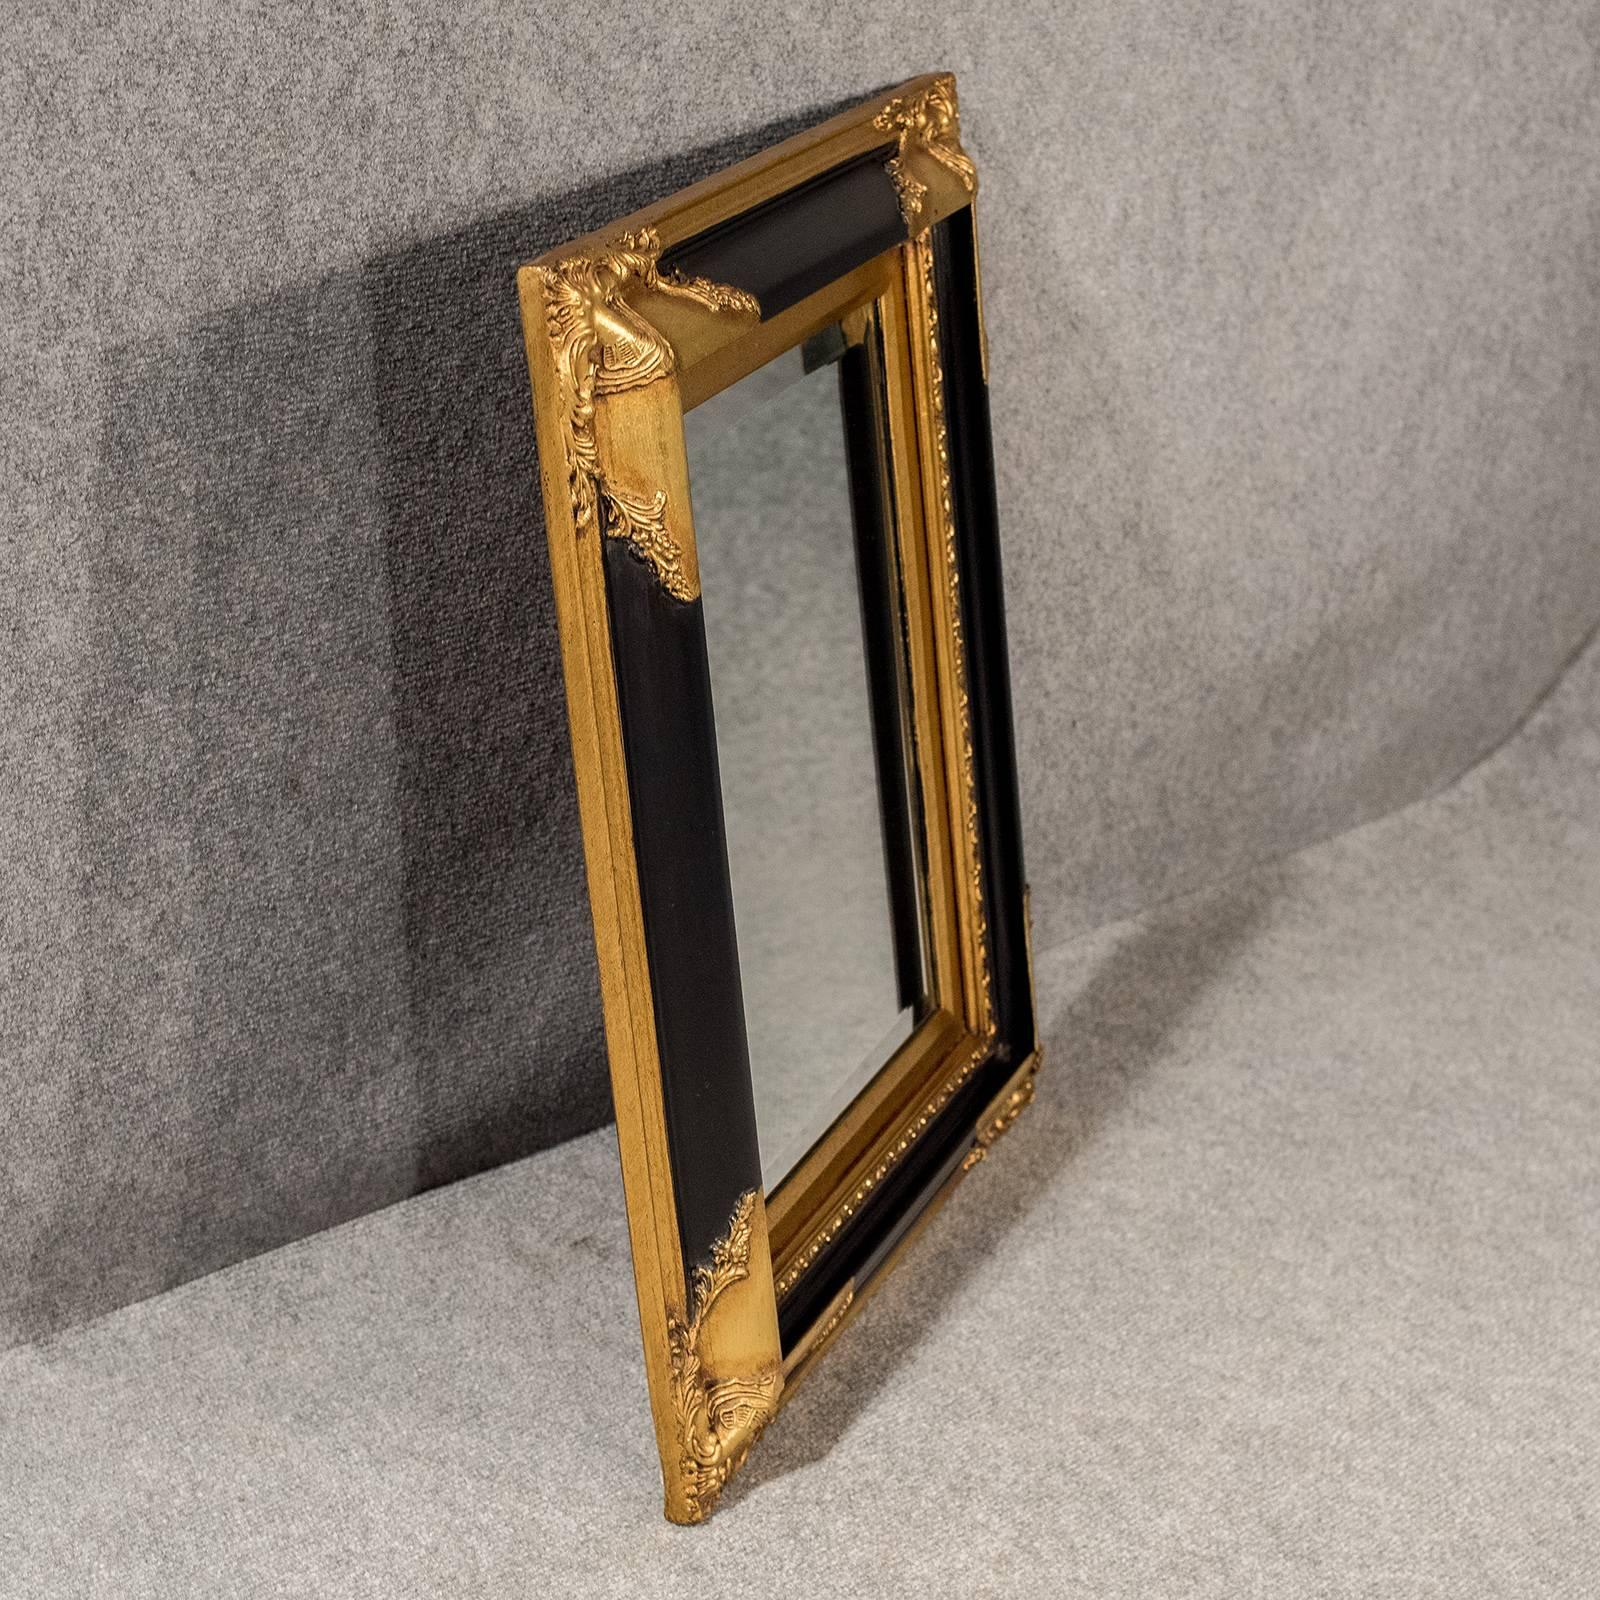 20th Century Bevelled Quality Antique Style Wall Mirror Overmantle Gilt Ornate Frame